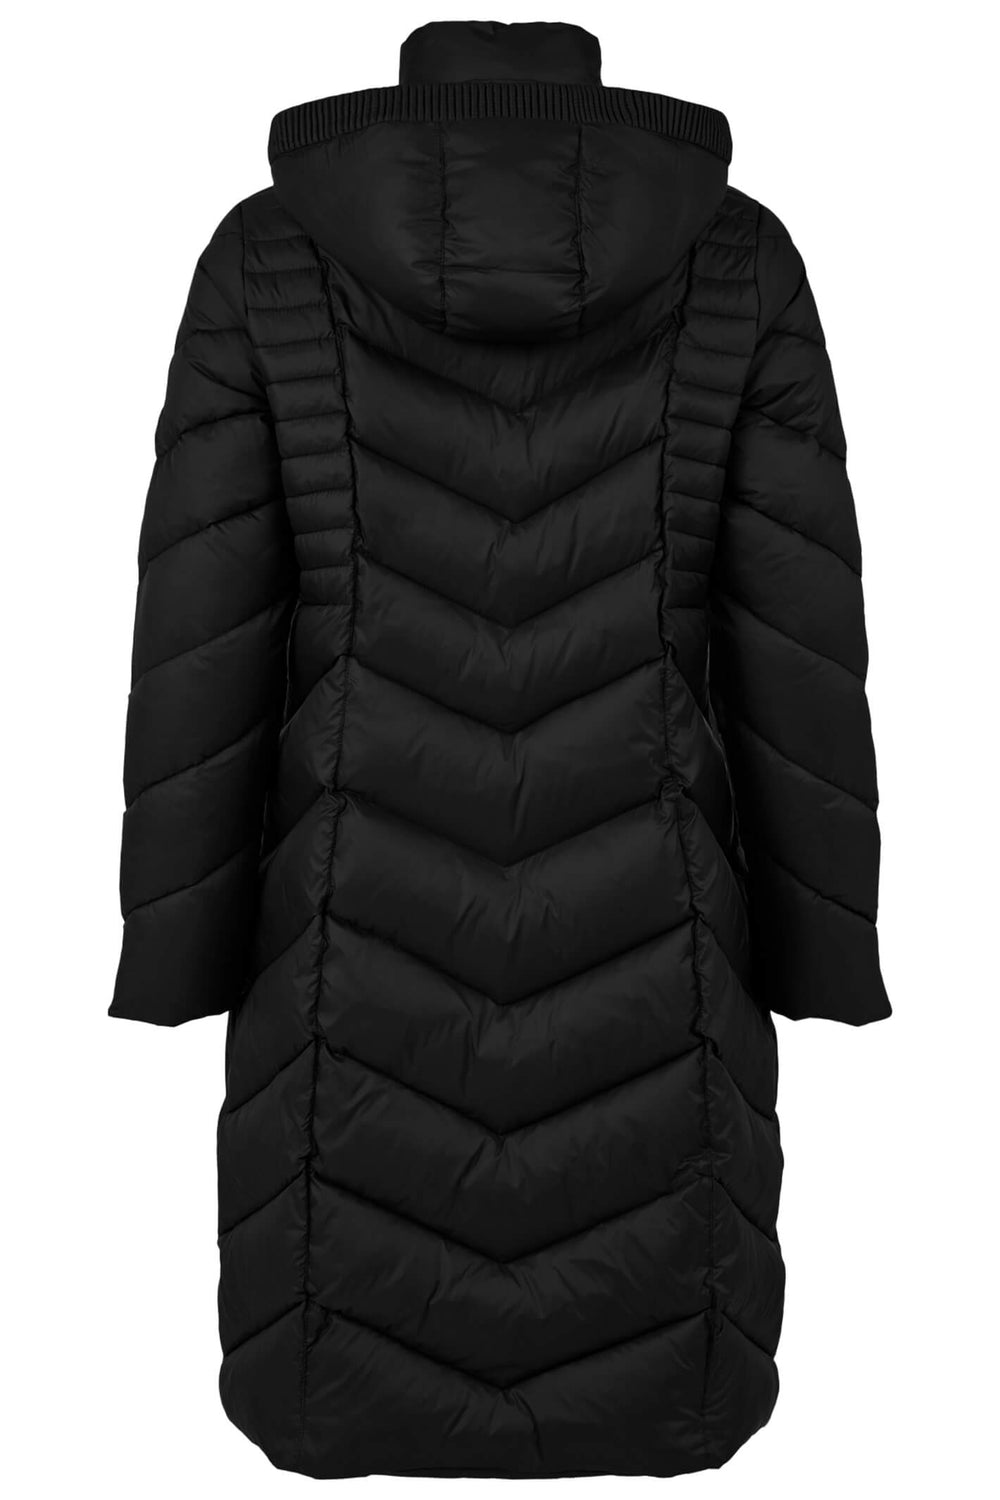 Frandsen 8223 Black Padded Coat With Hood - Dotique Chesterfield